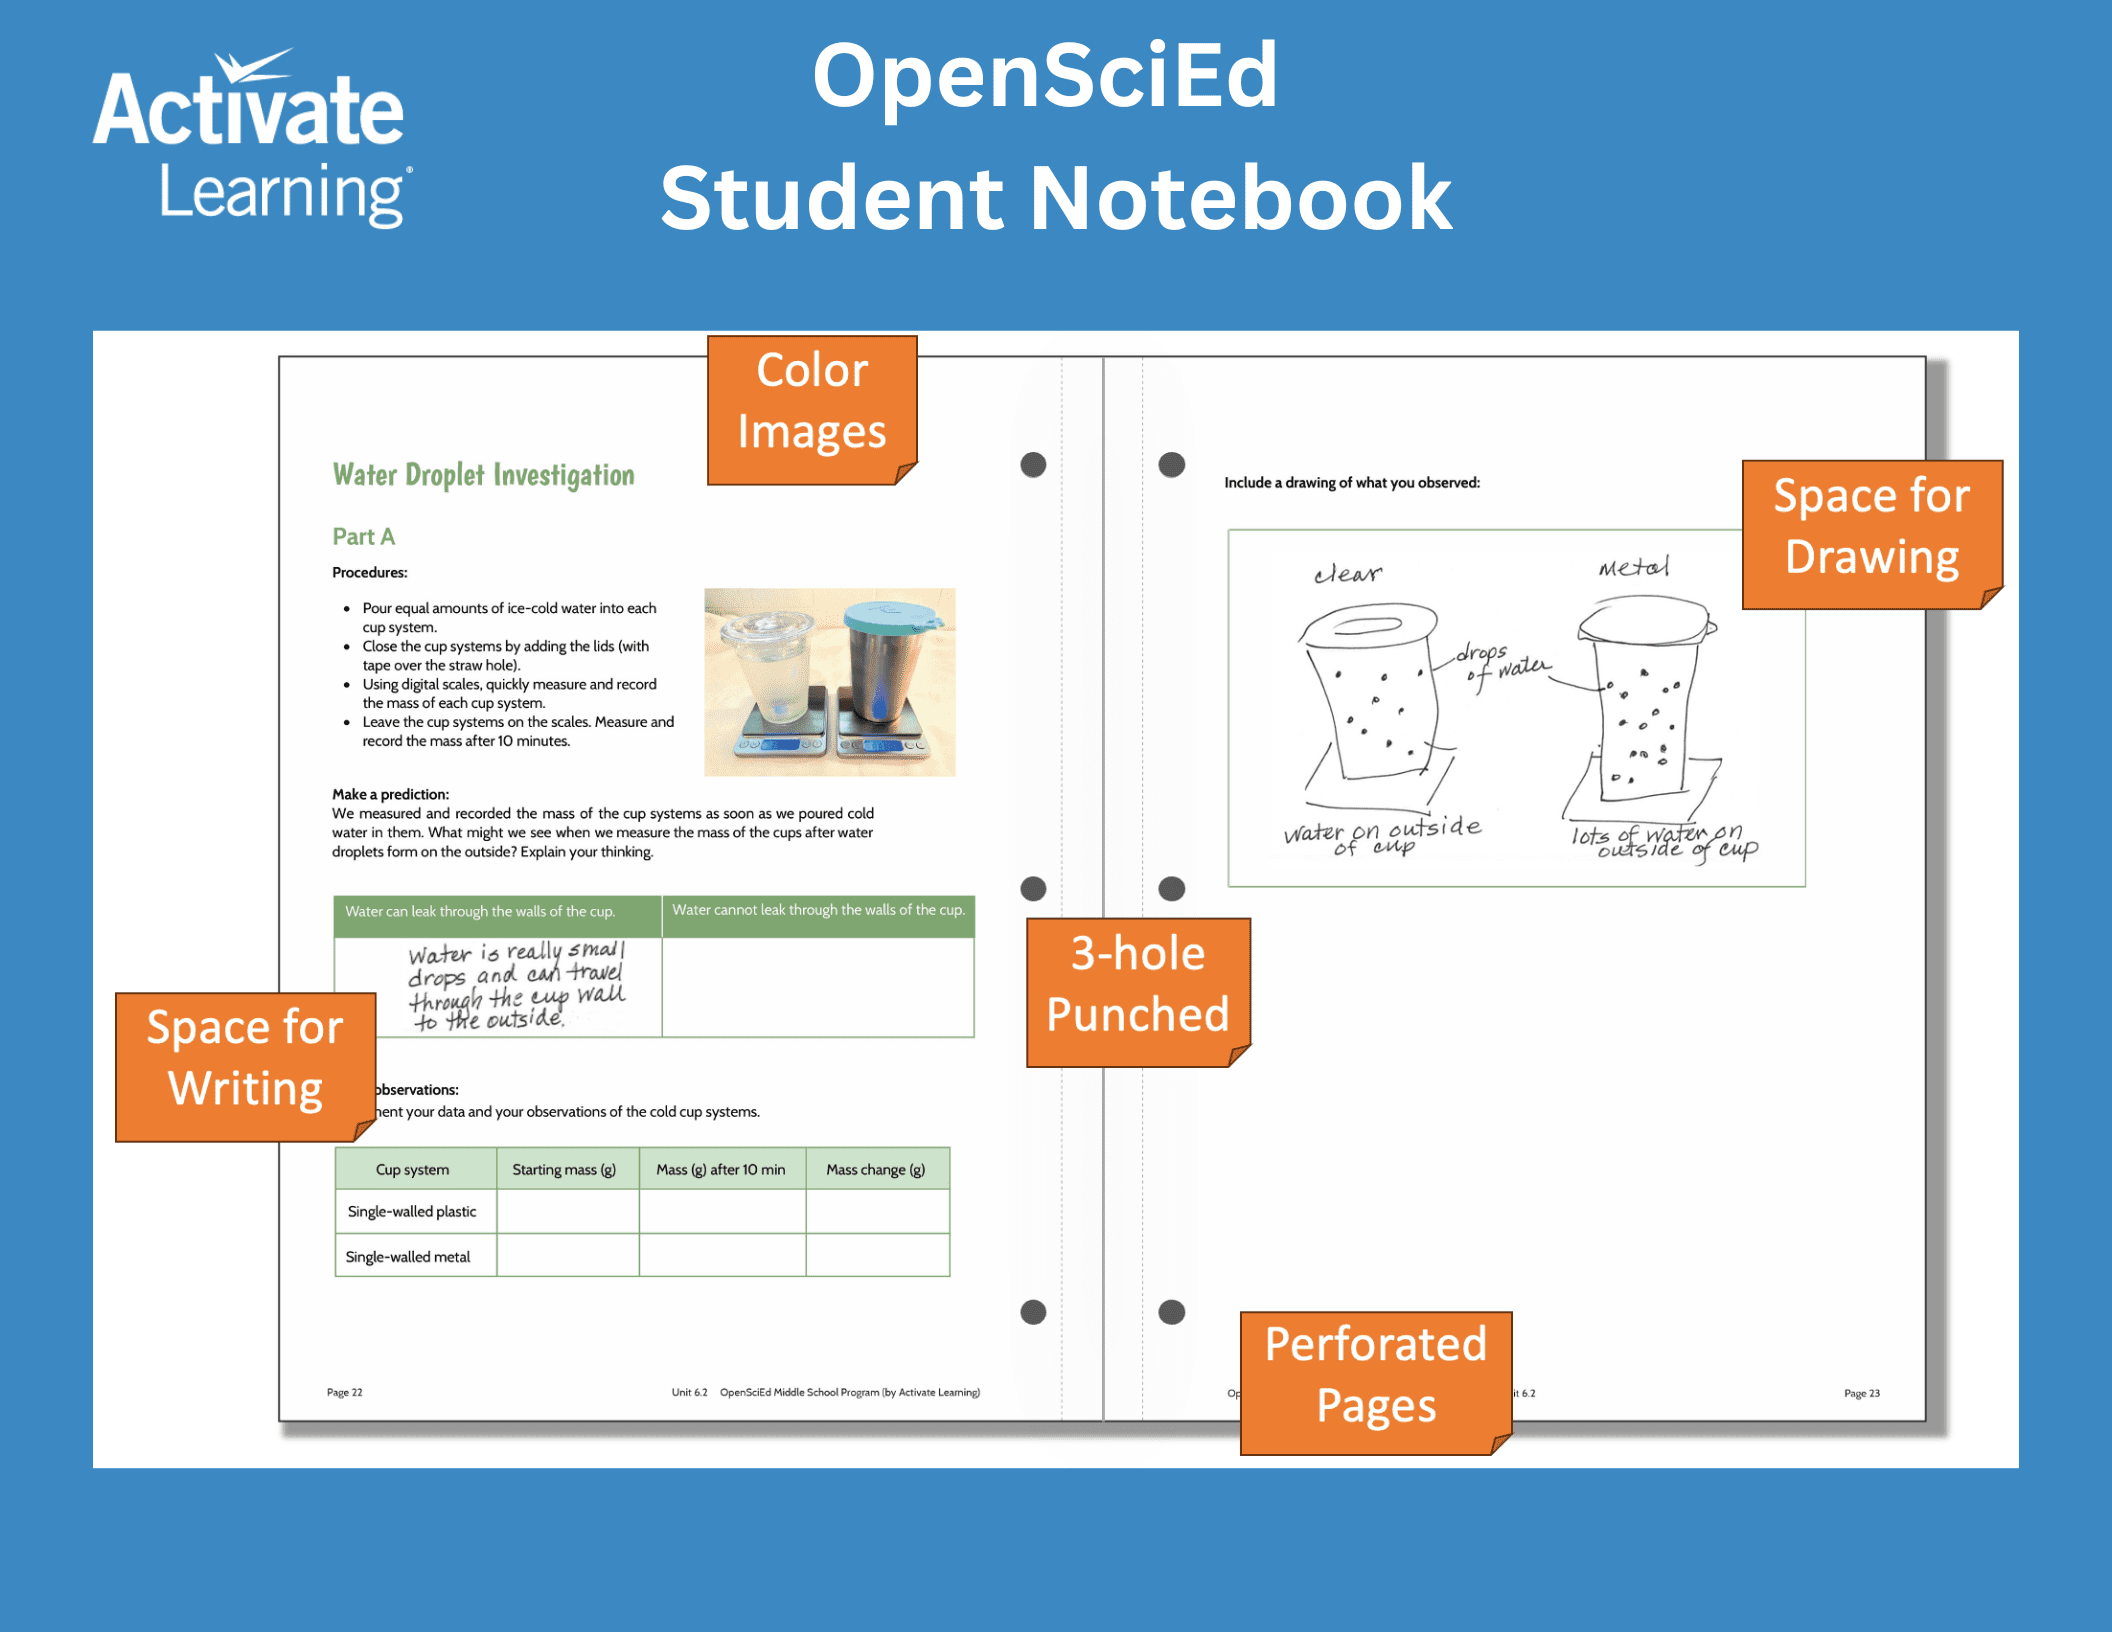 OpenSciEd Student Notebook from Activate Learning